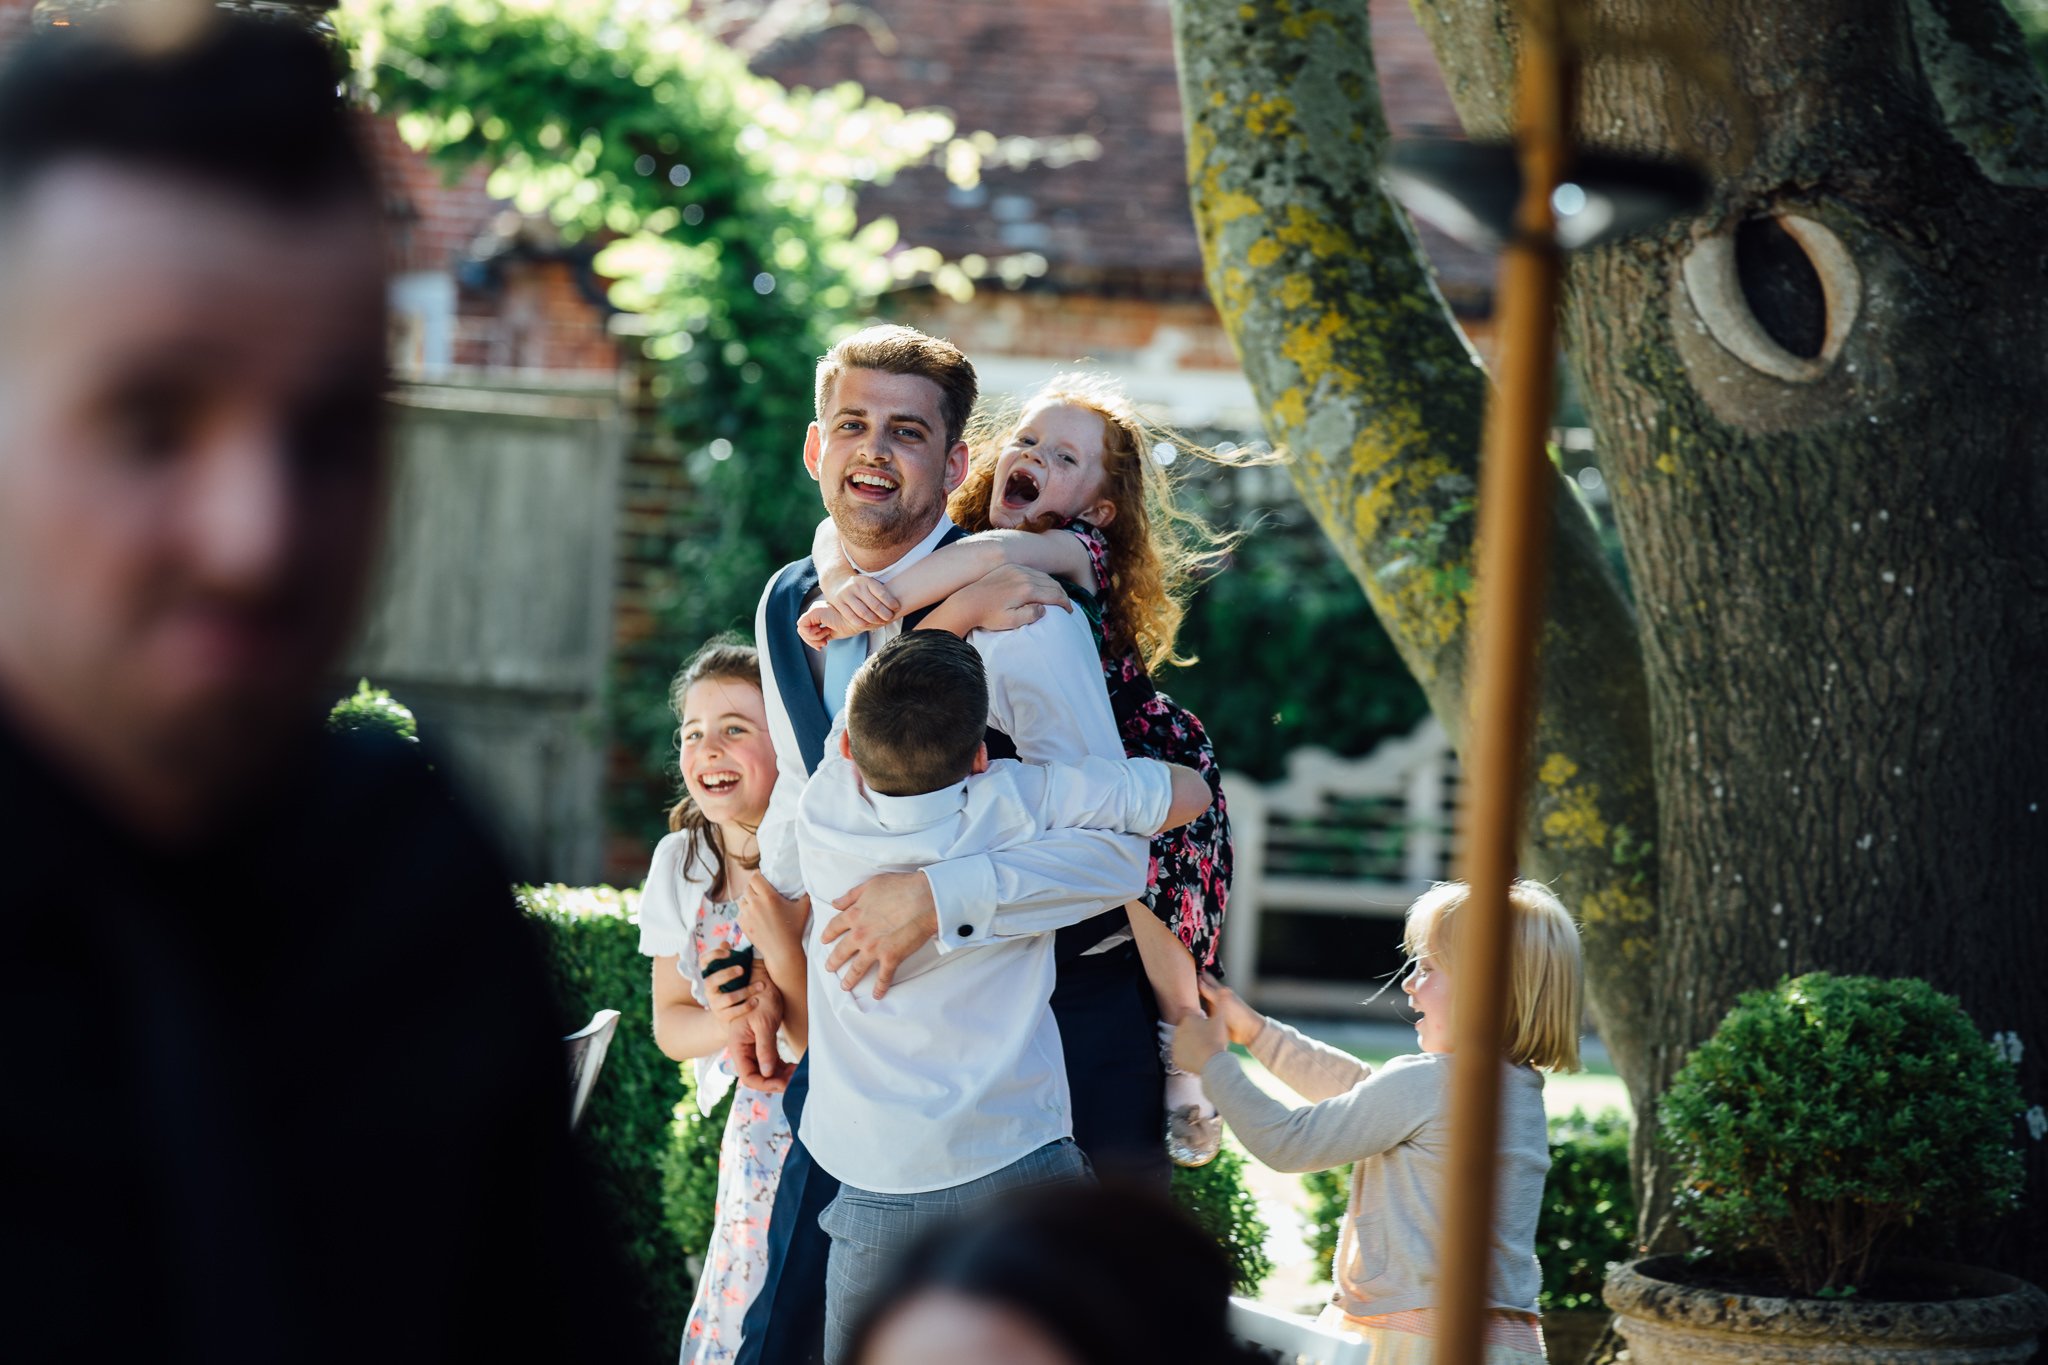  Wedding guest is climbed on by children 